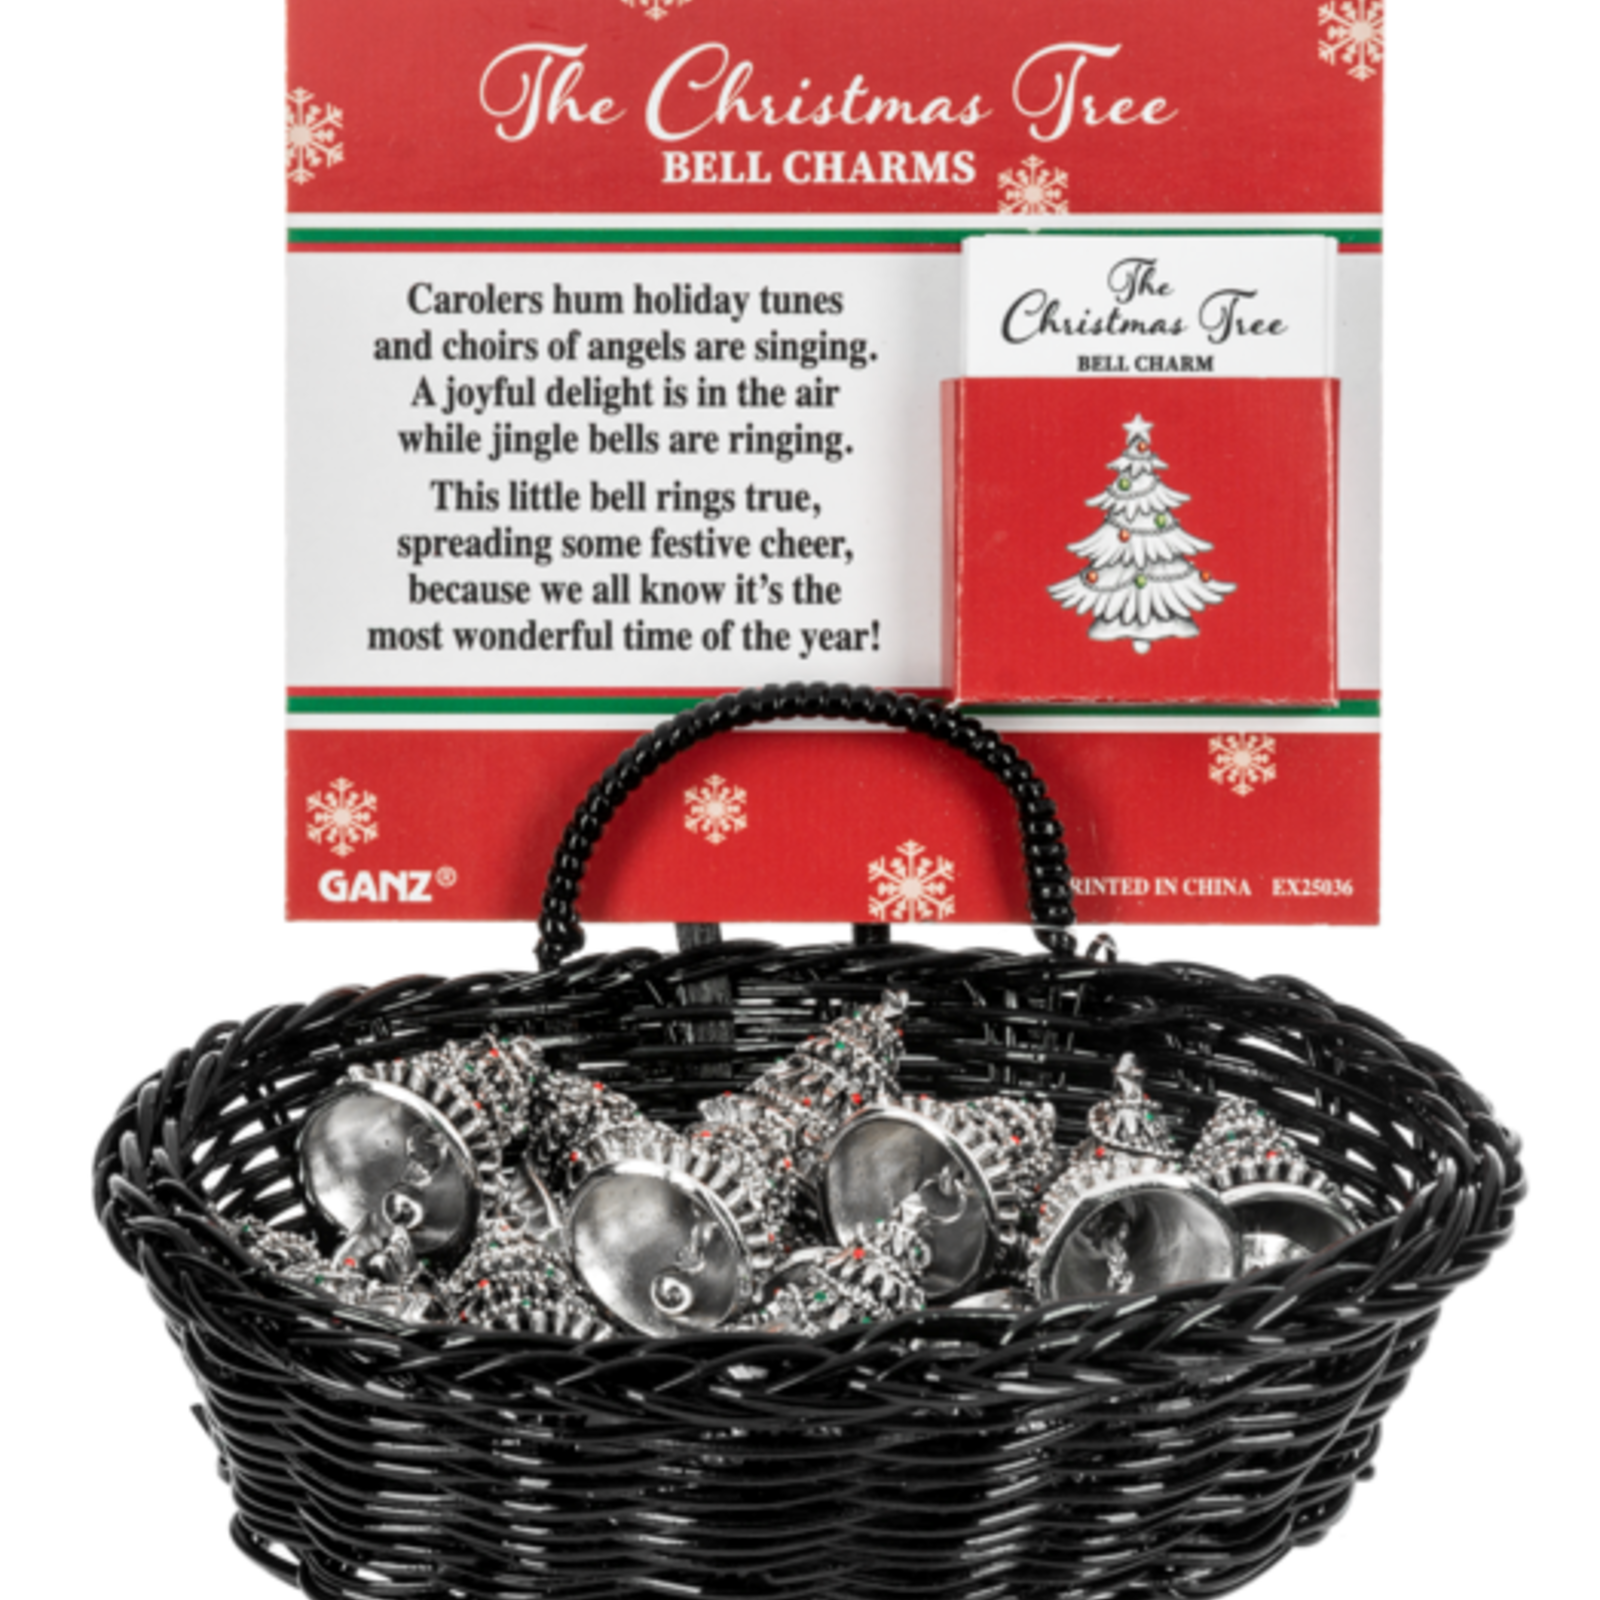 Ganz The Christmas Tree Bell Charms in a Basket  EX25036 loading=